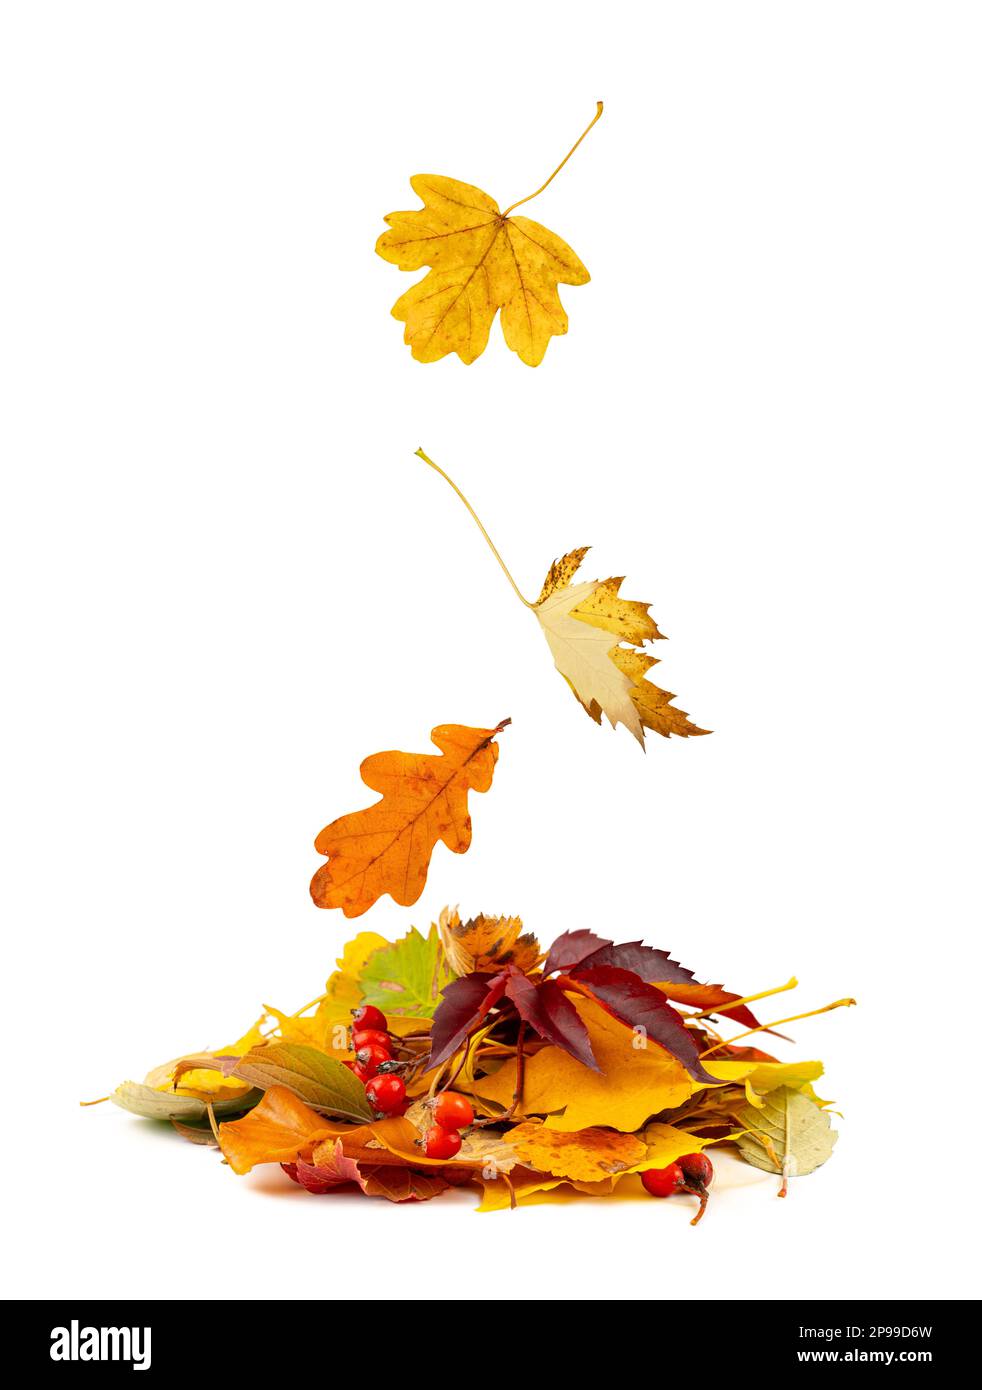 Autumn Leaf Falling to Pile Isolated, Colored Autumn Tree Leaves Flying, Yellow Orange Green Foliage, Fall Leaf Collection on White Background Side Vi Stock Photo